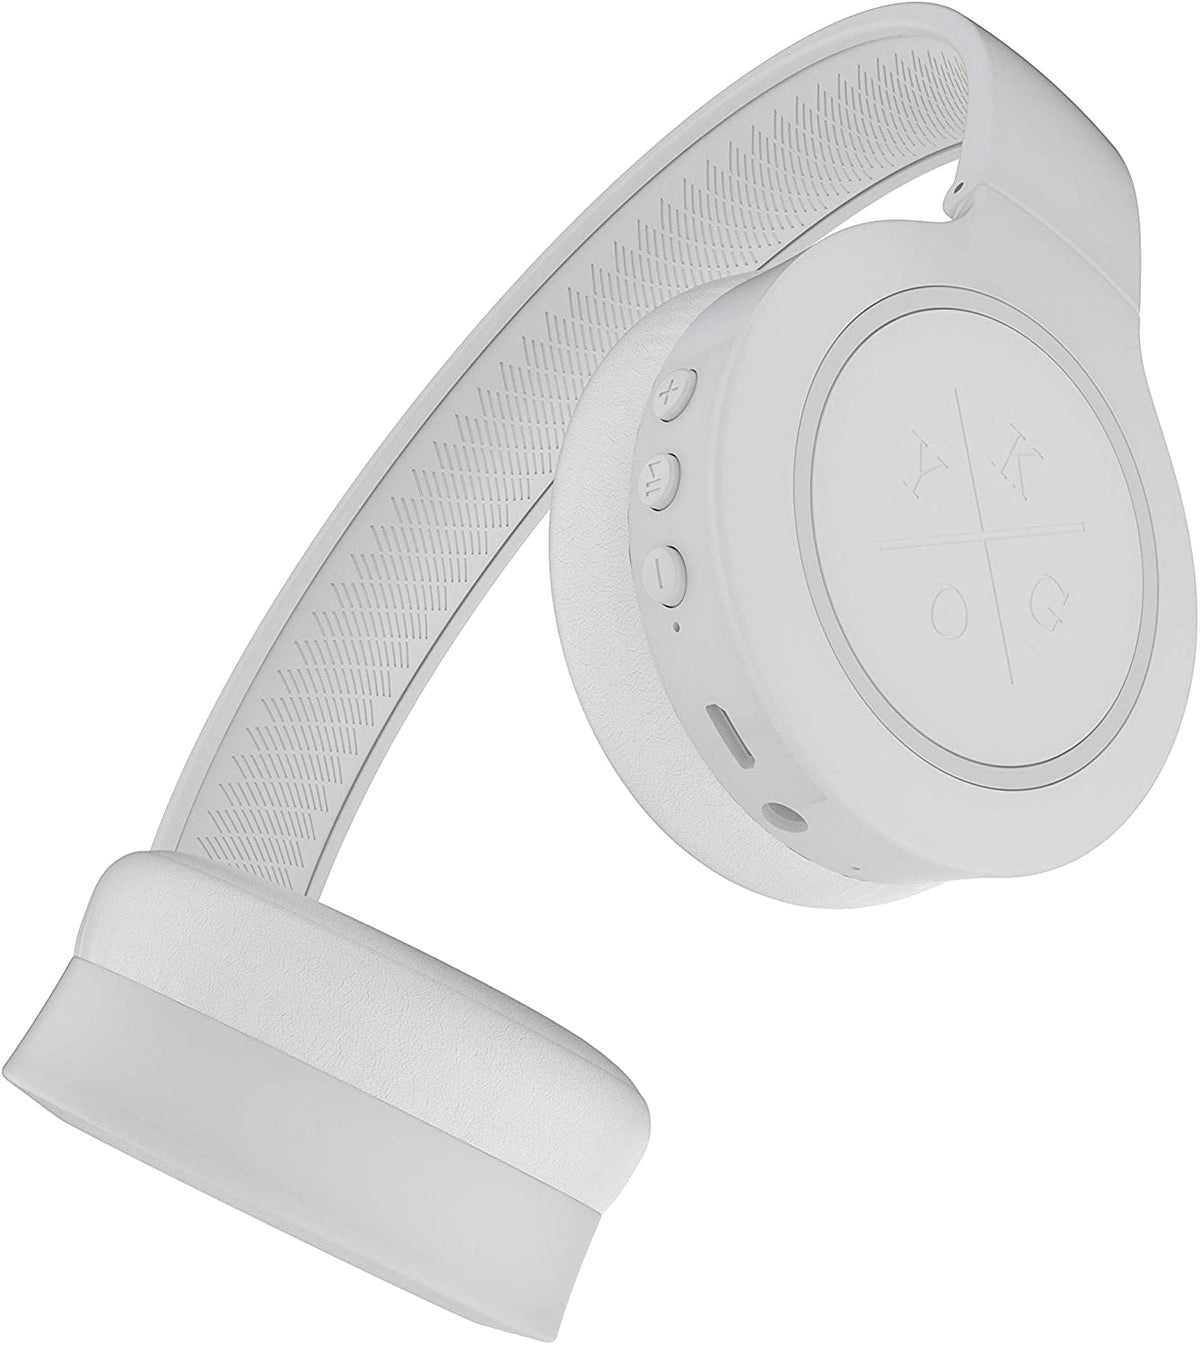 KYGO A4/300 WIRELESS BLUETOOTH 4.2 ON EAR HEADPHONES - WHITE [ACCESSORIES]